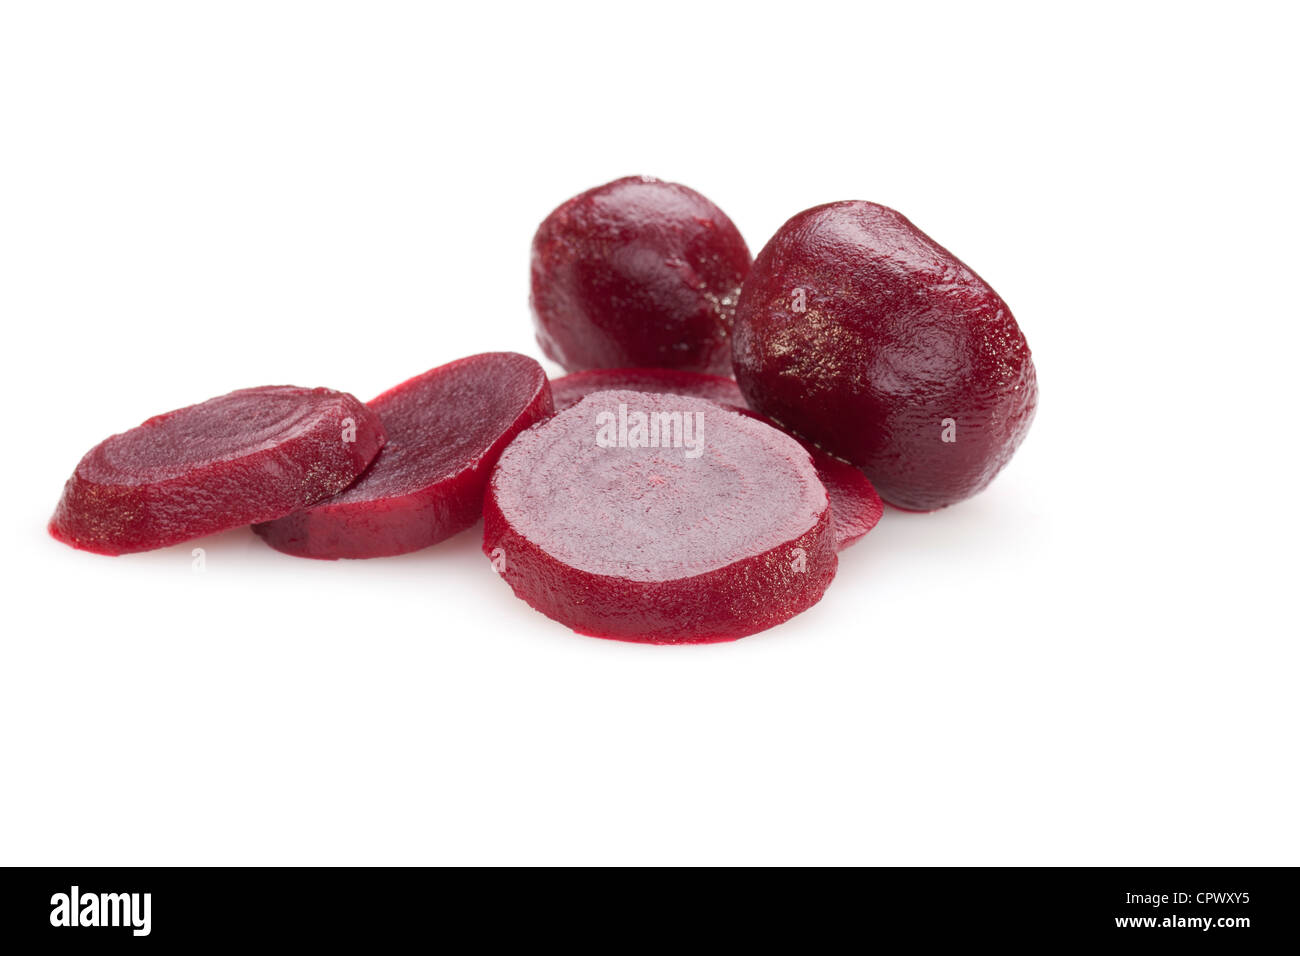 Whole and sliced beetroot from a can Stock Photo